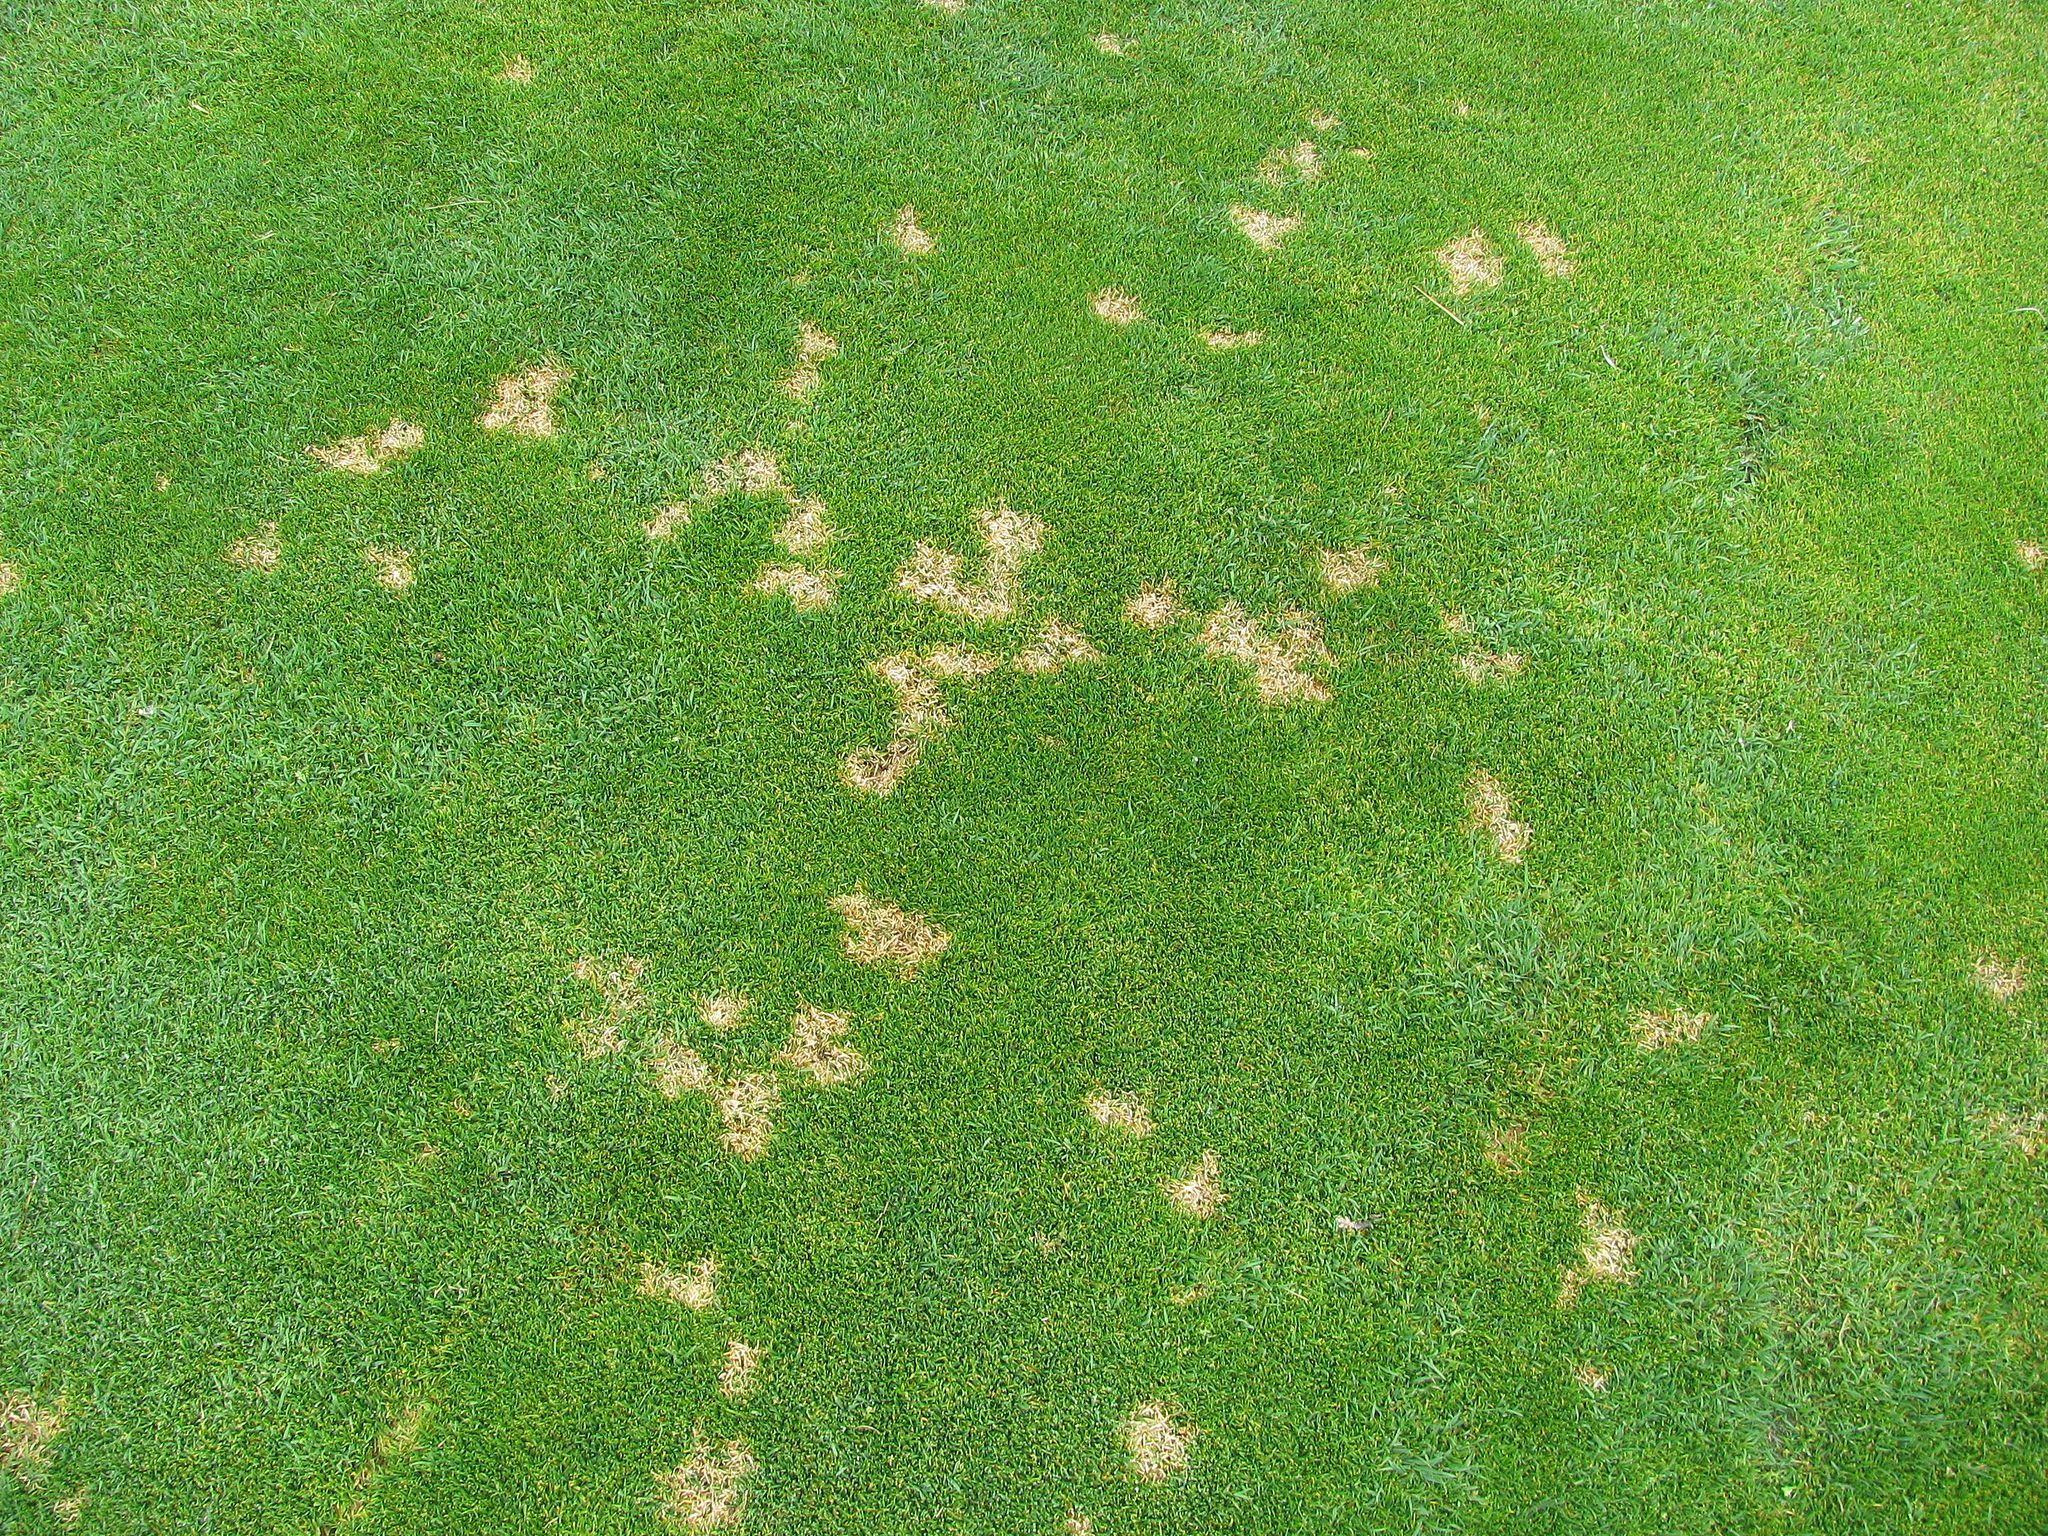 A photograph of the bleach-colored spots of Dollar Spot Fungus in short-cut grass.